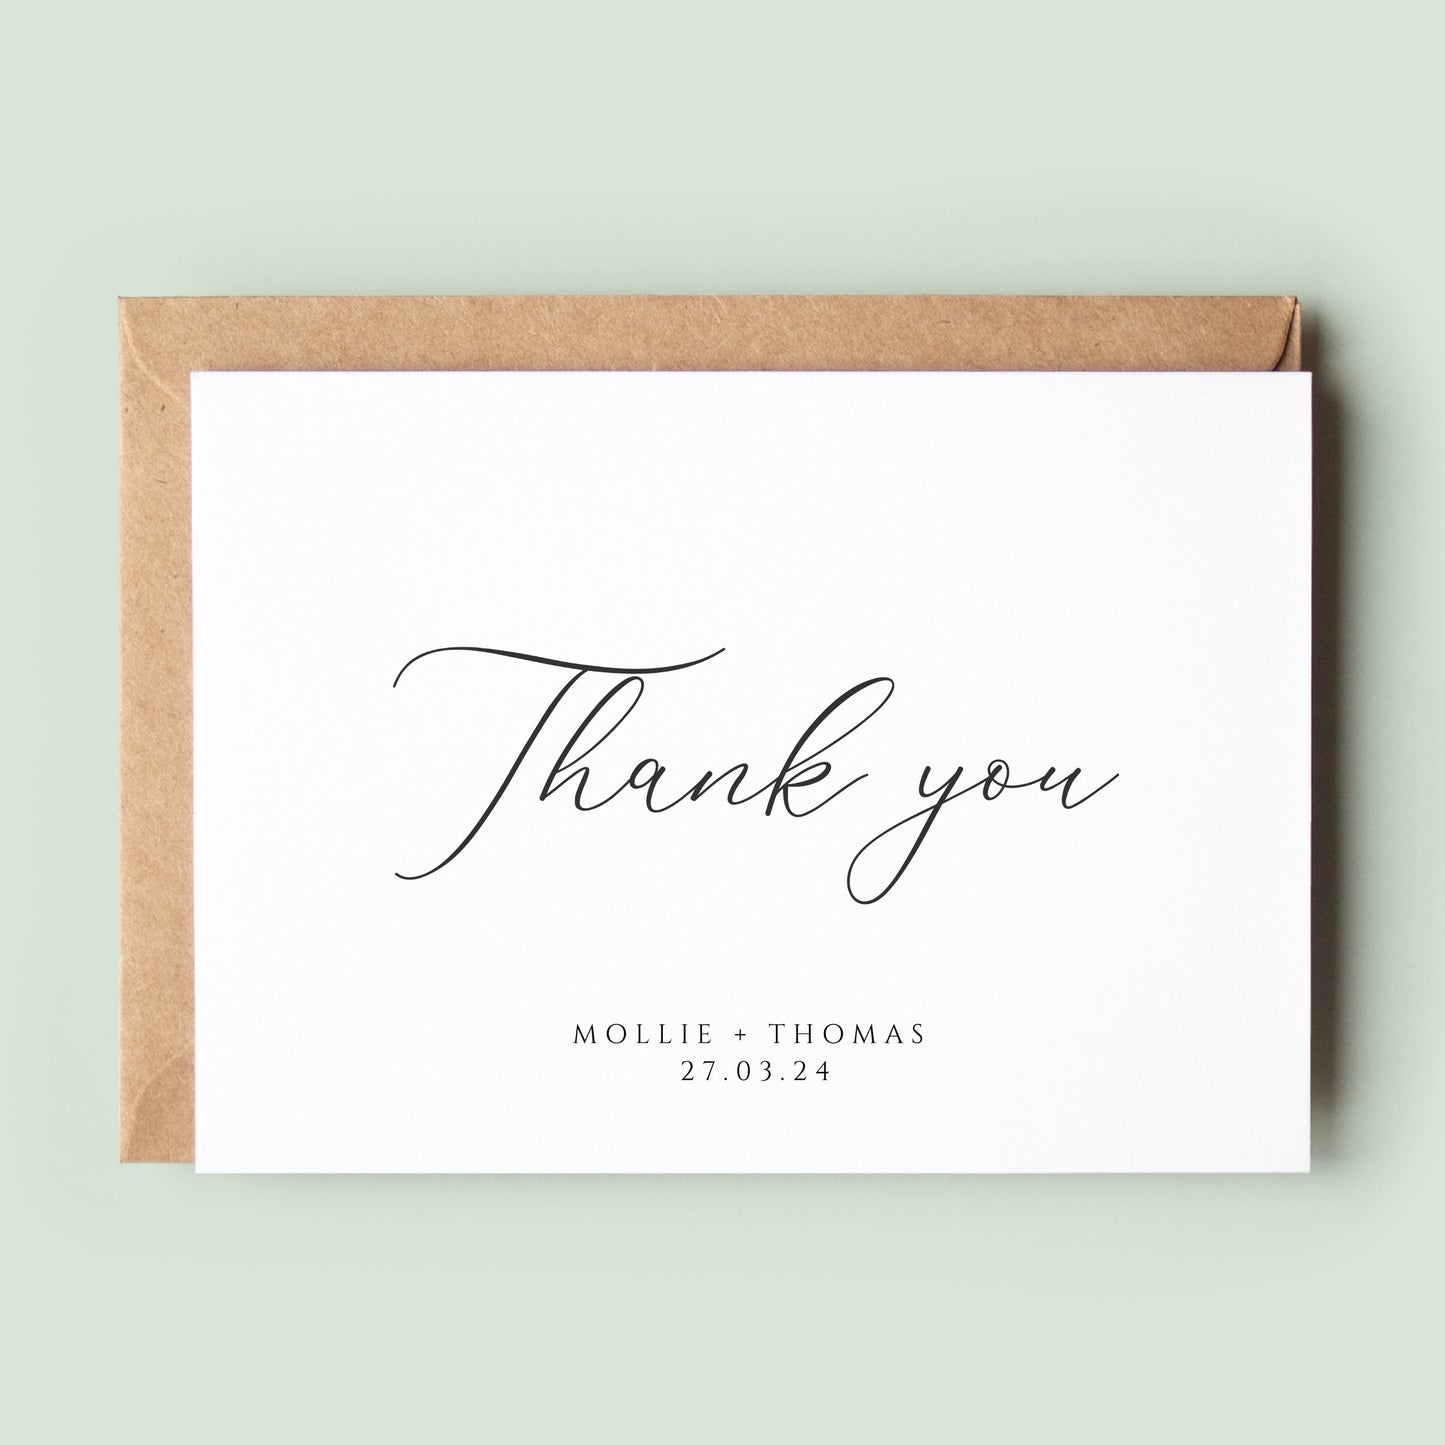 Personalised Wedding Thank You Card, Thank You Card from Bride, Thank You Card from Groom, Thank You Card Wedding, Wedding Thank You - #259